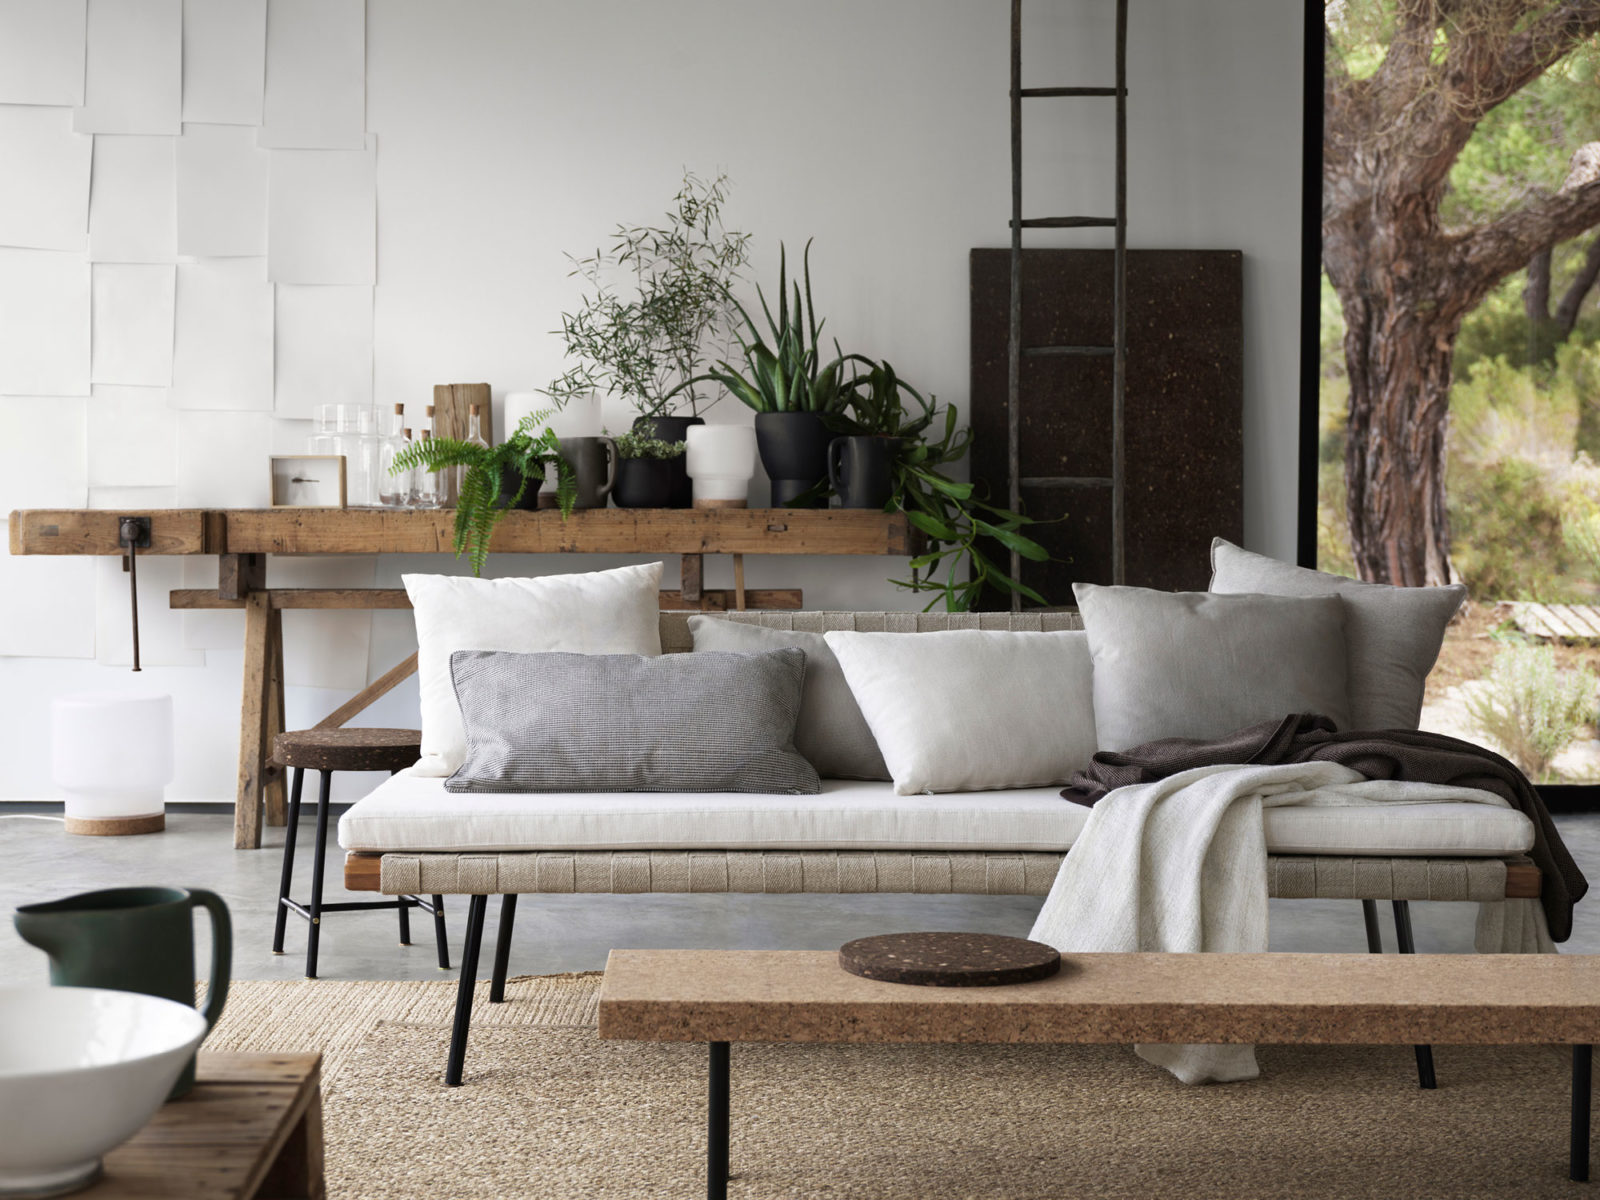 Interior with green plants and sofa, stools, table, sideboard of natural materials such as cork, wood and bamboo.